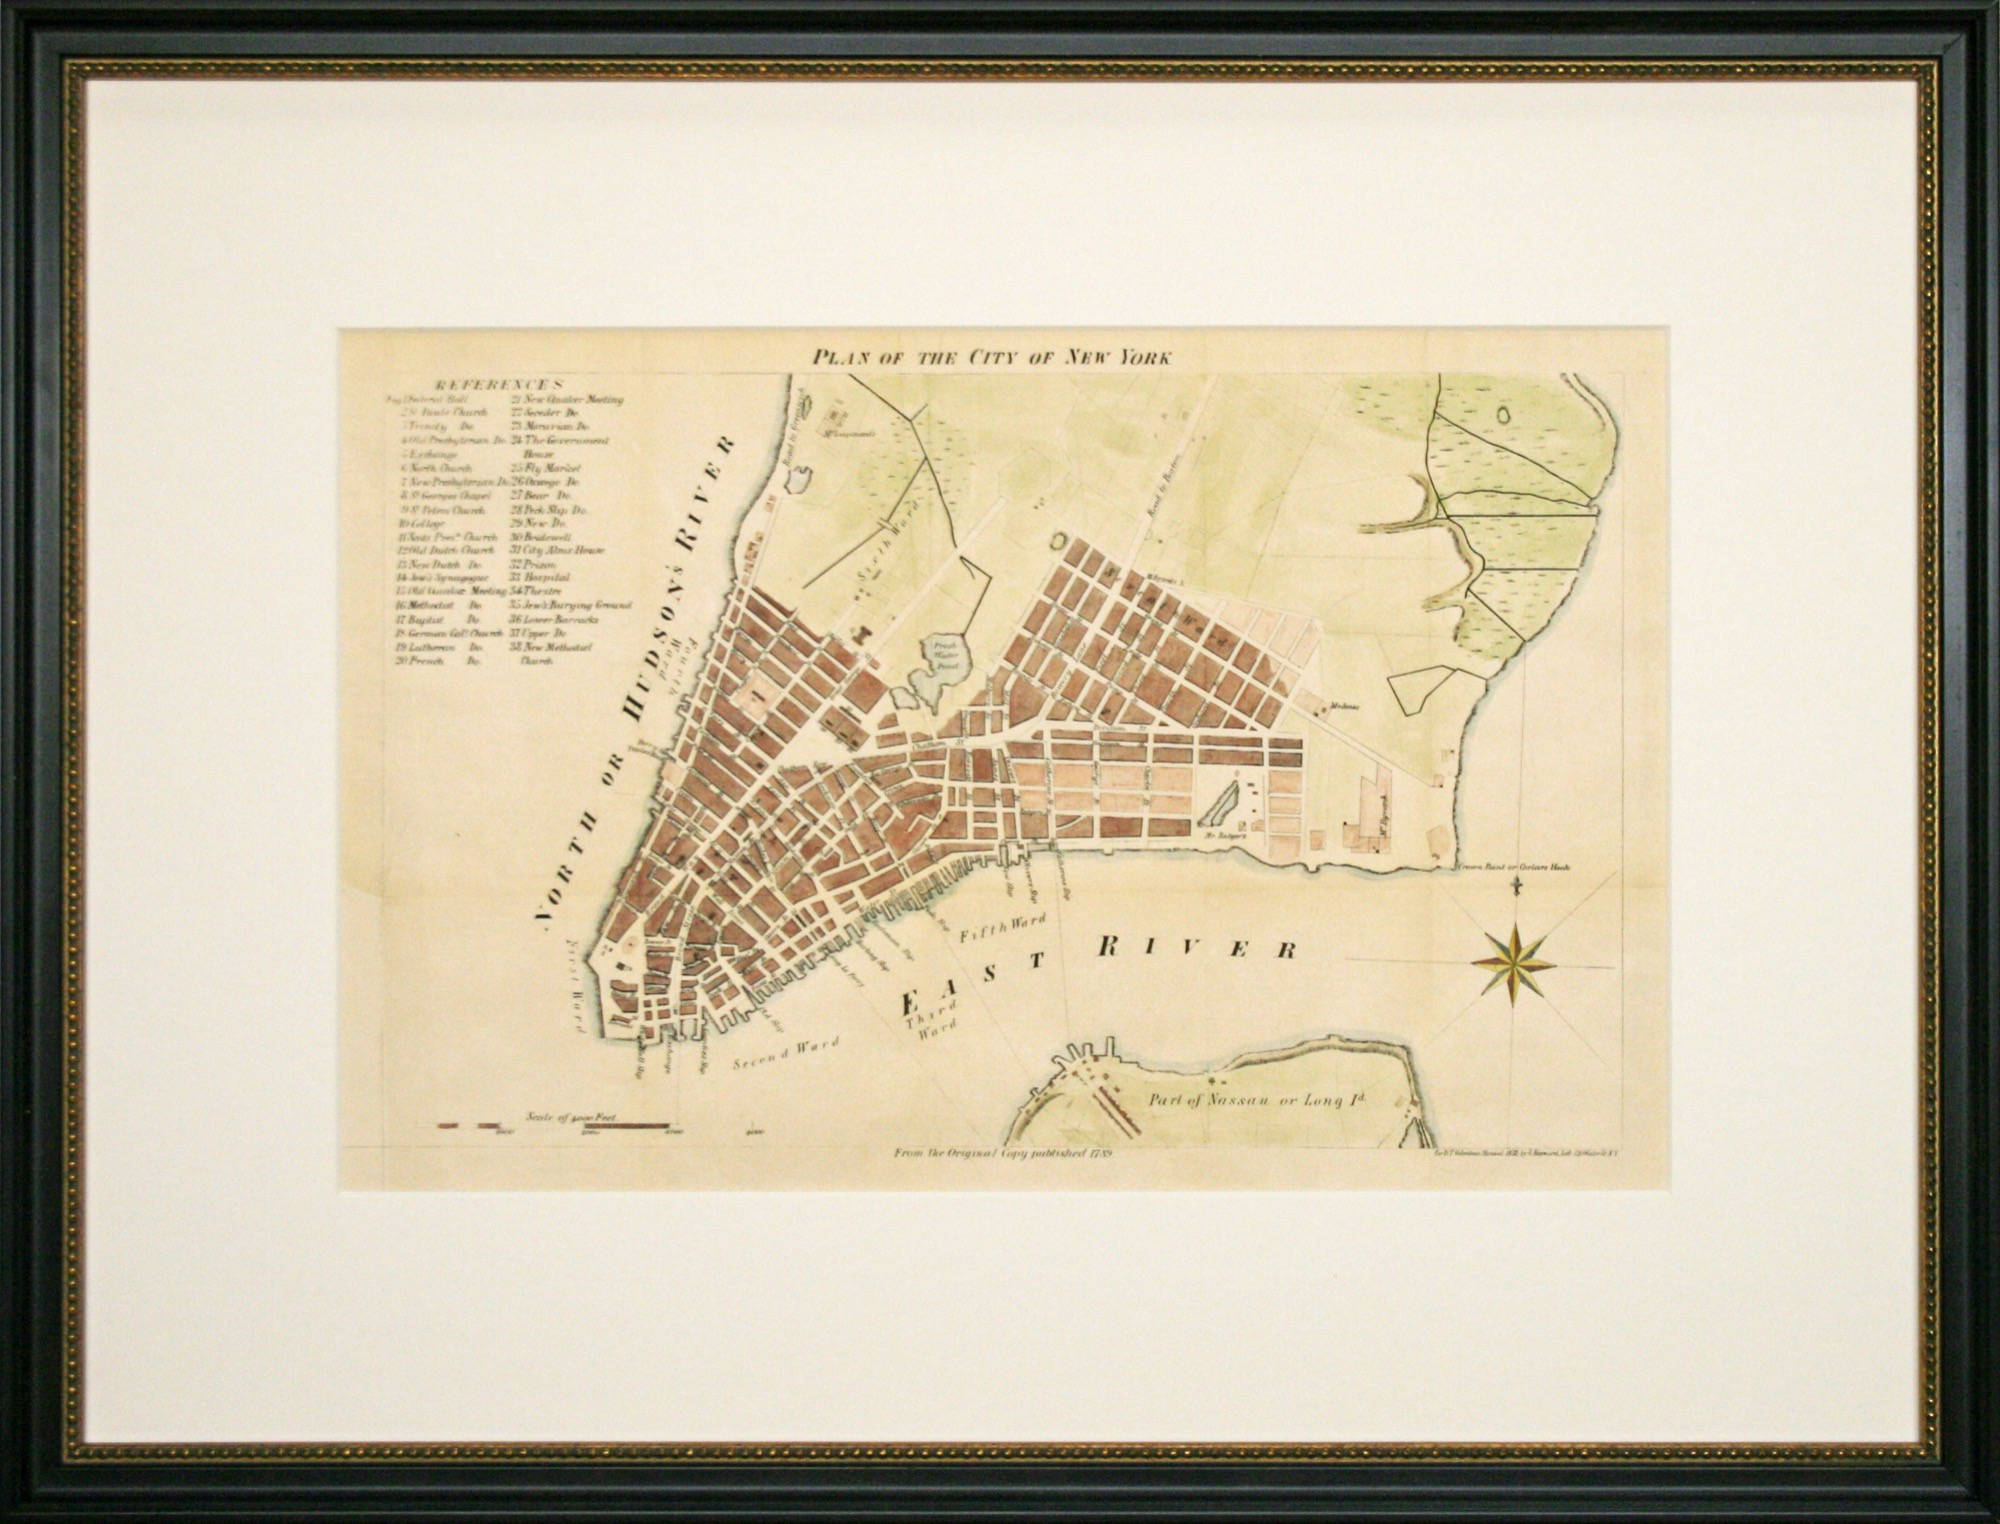 Plan of the City of New York 1857